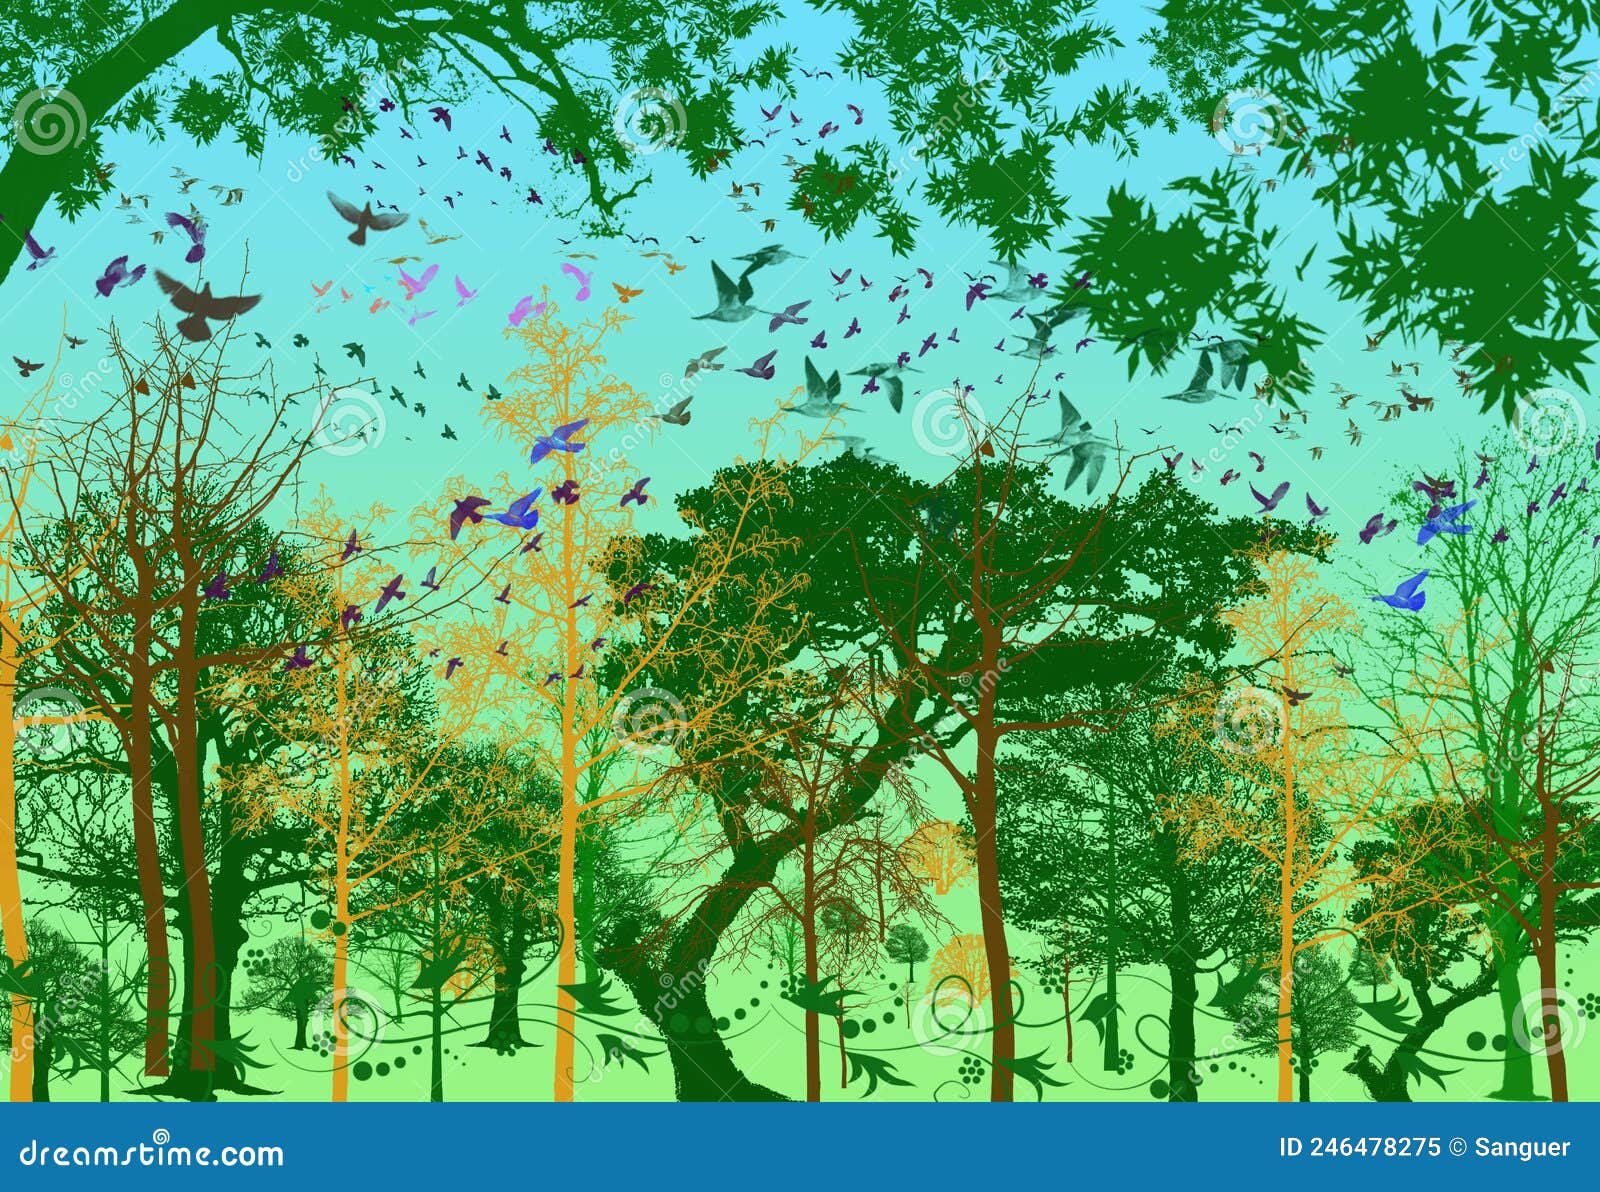 fantastic  of a forest with birds